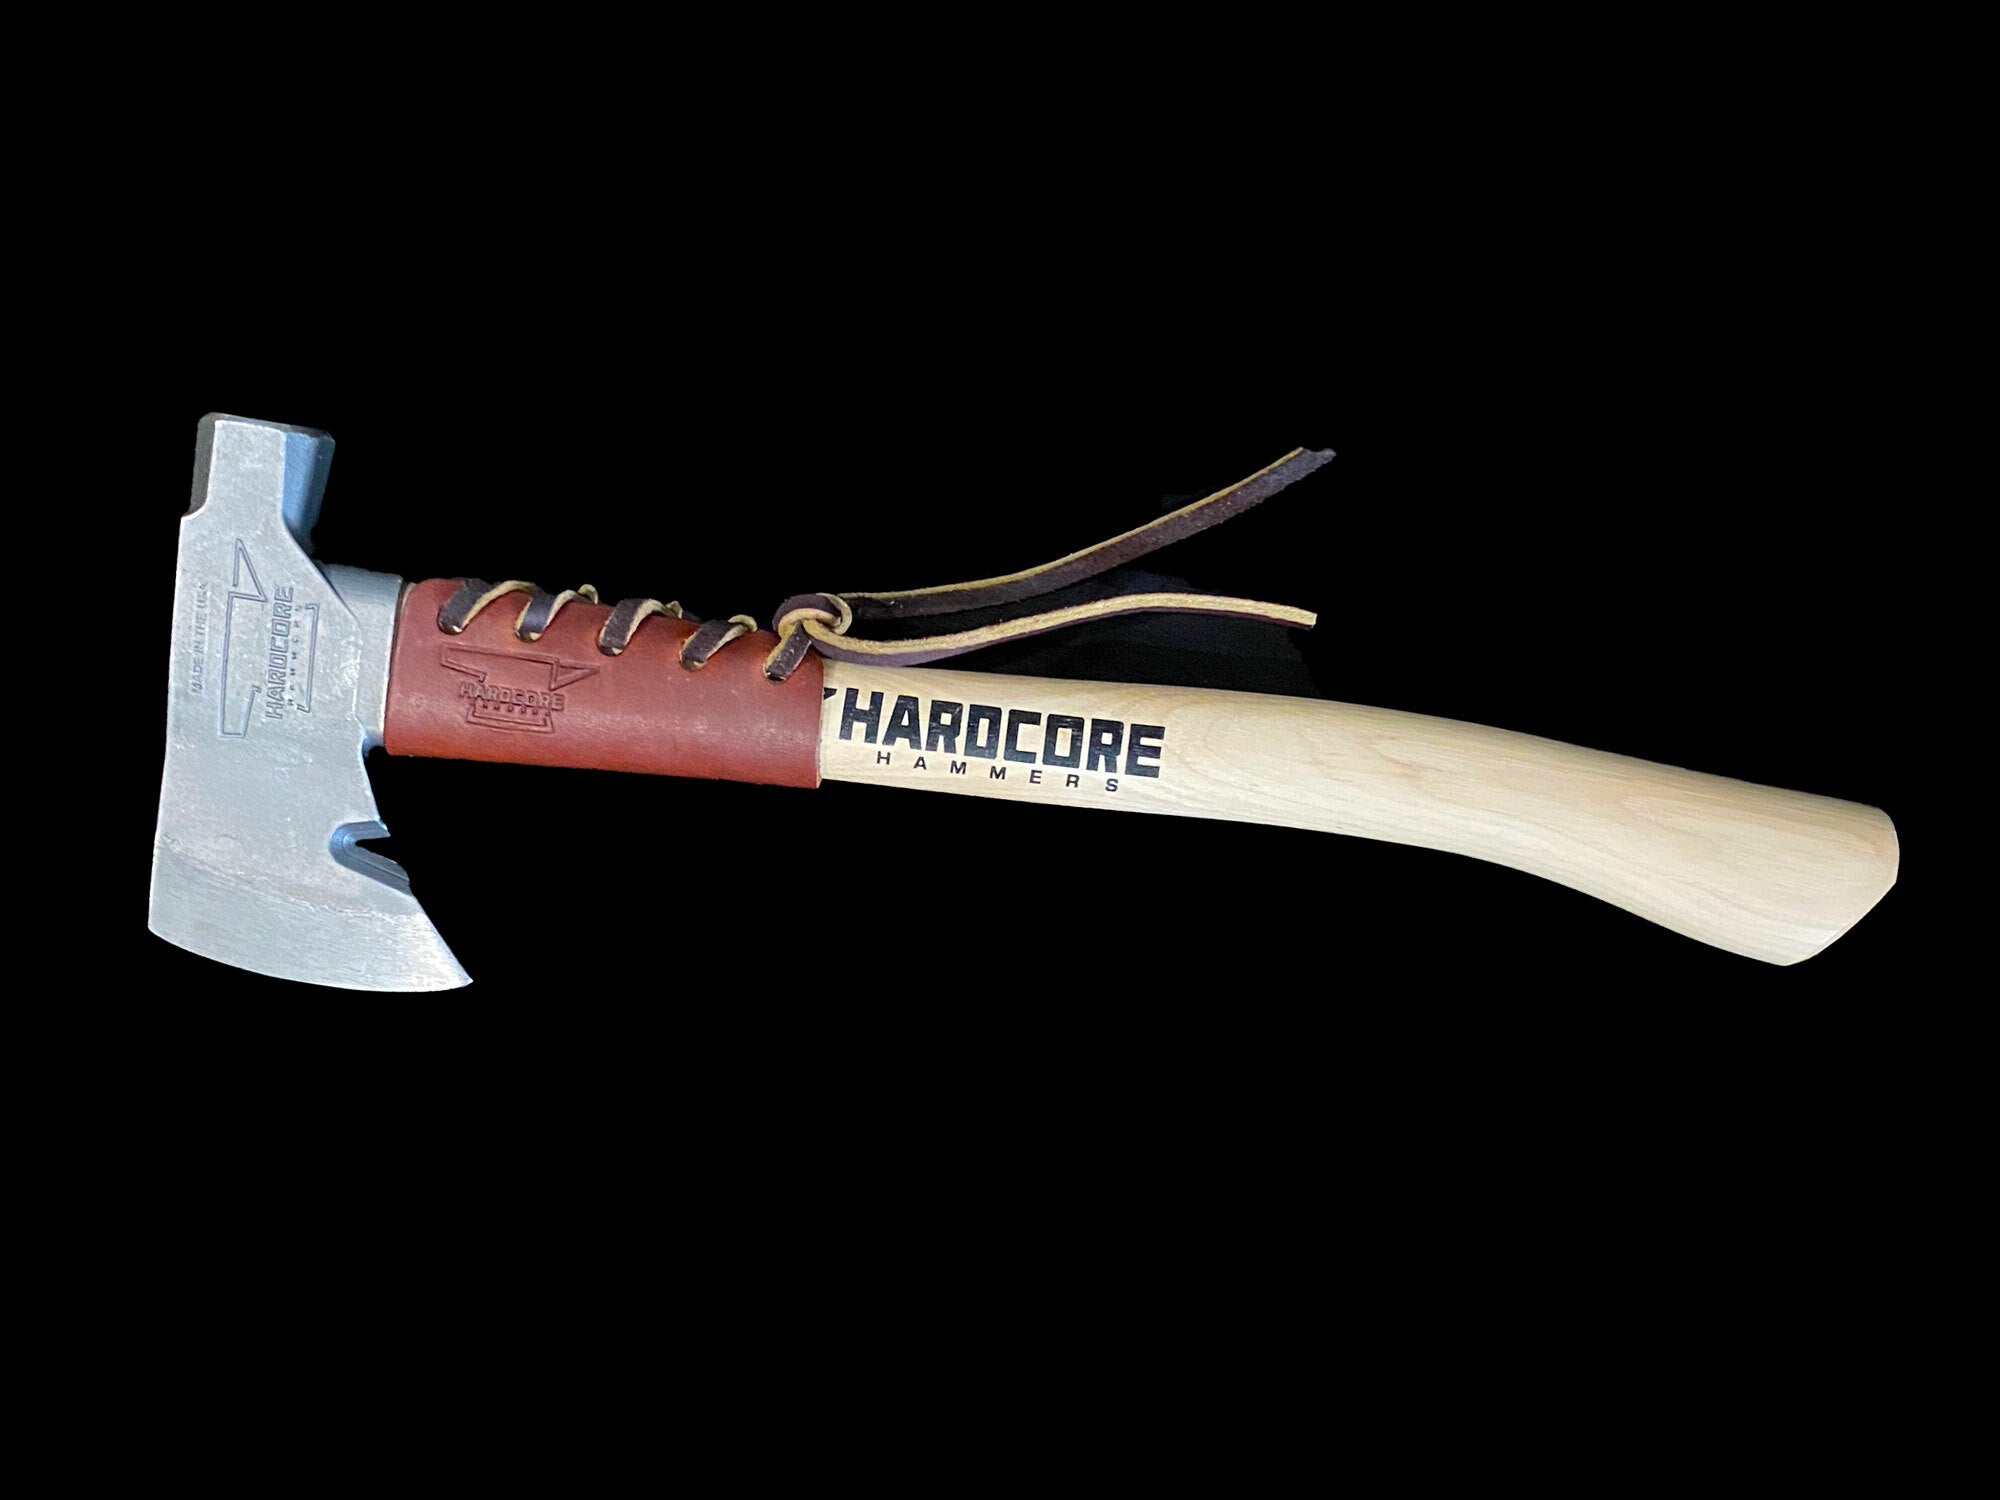 Hardcore Leather Handle Protector Collar - Trusted Gear Company LLC